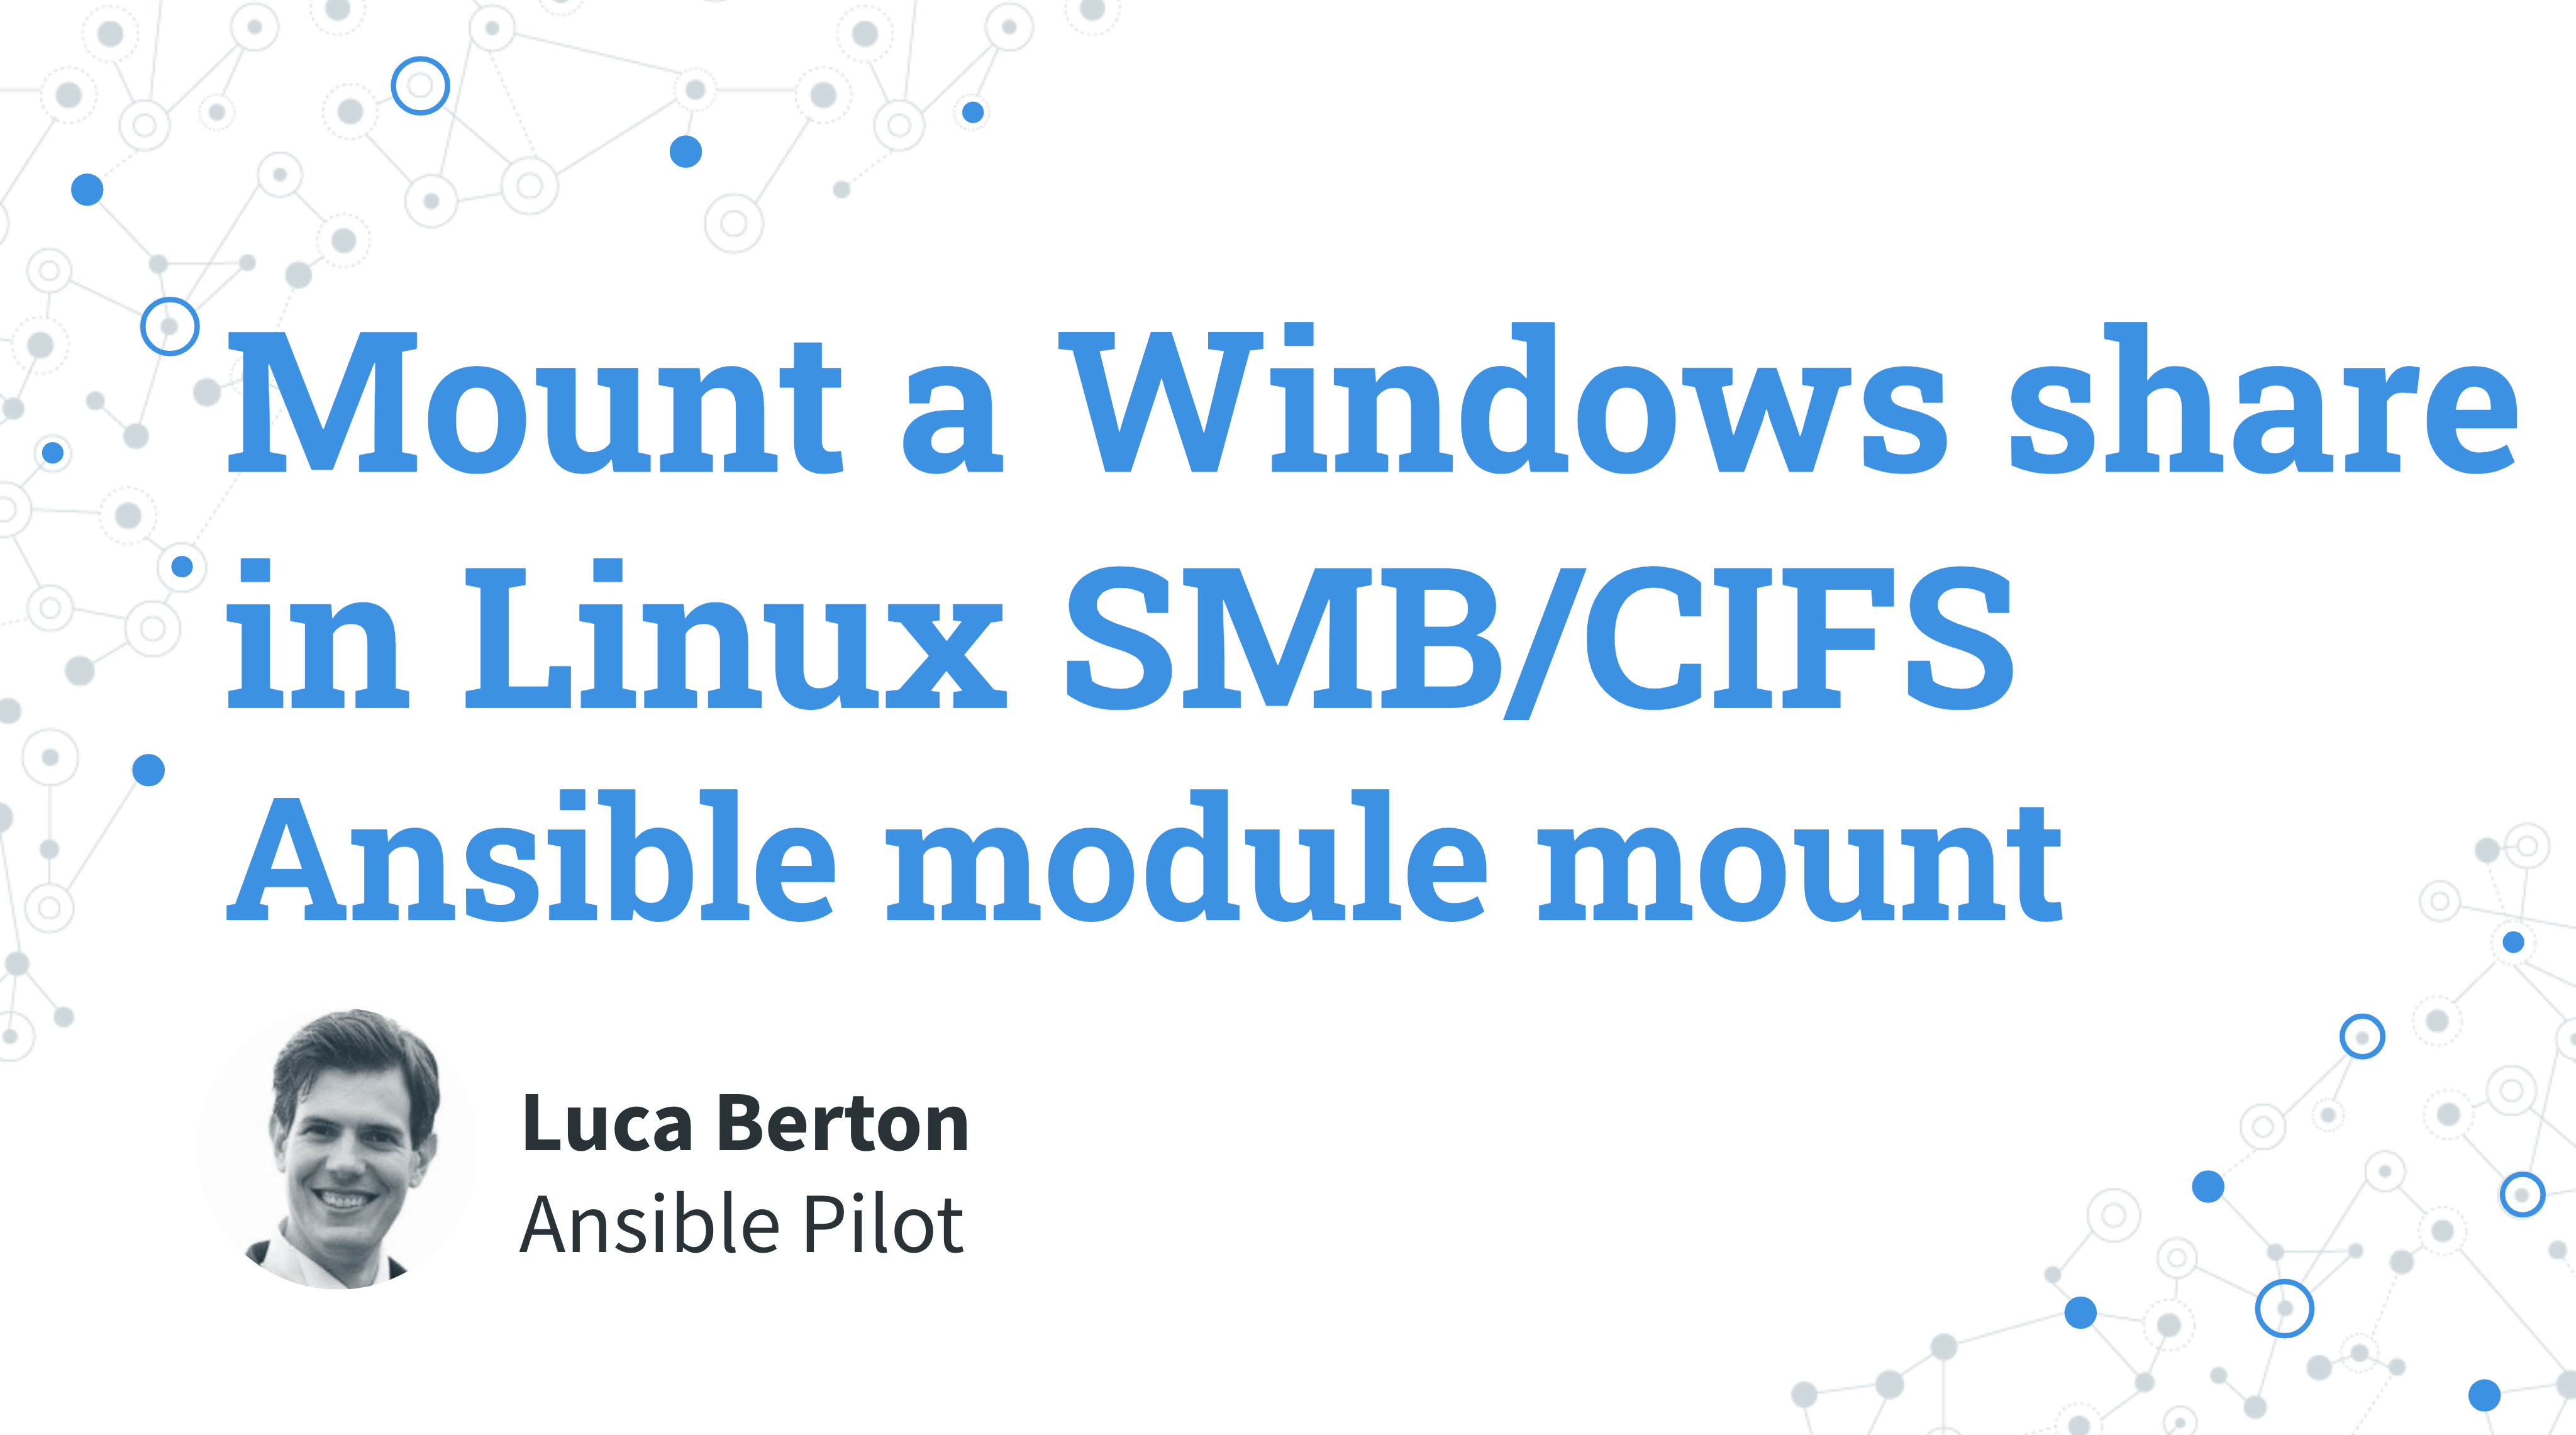 Mount a Windows share in Linux SMB/CIFS - Ansible module mount